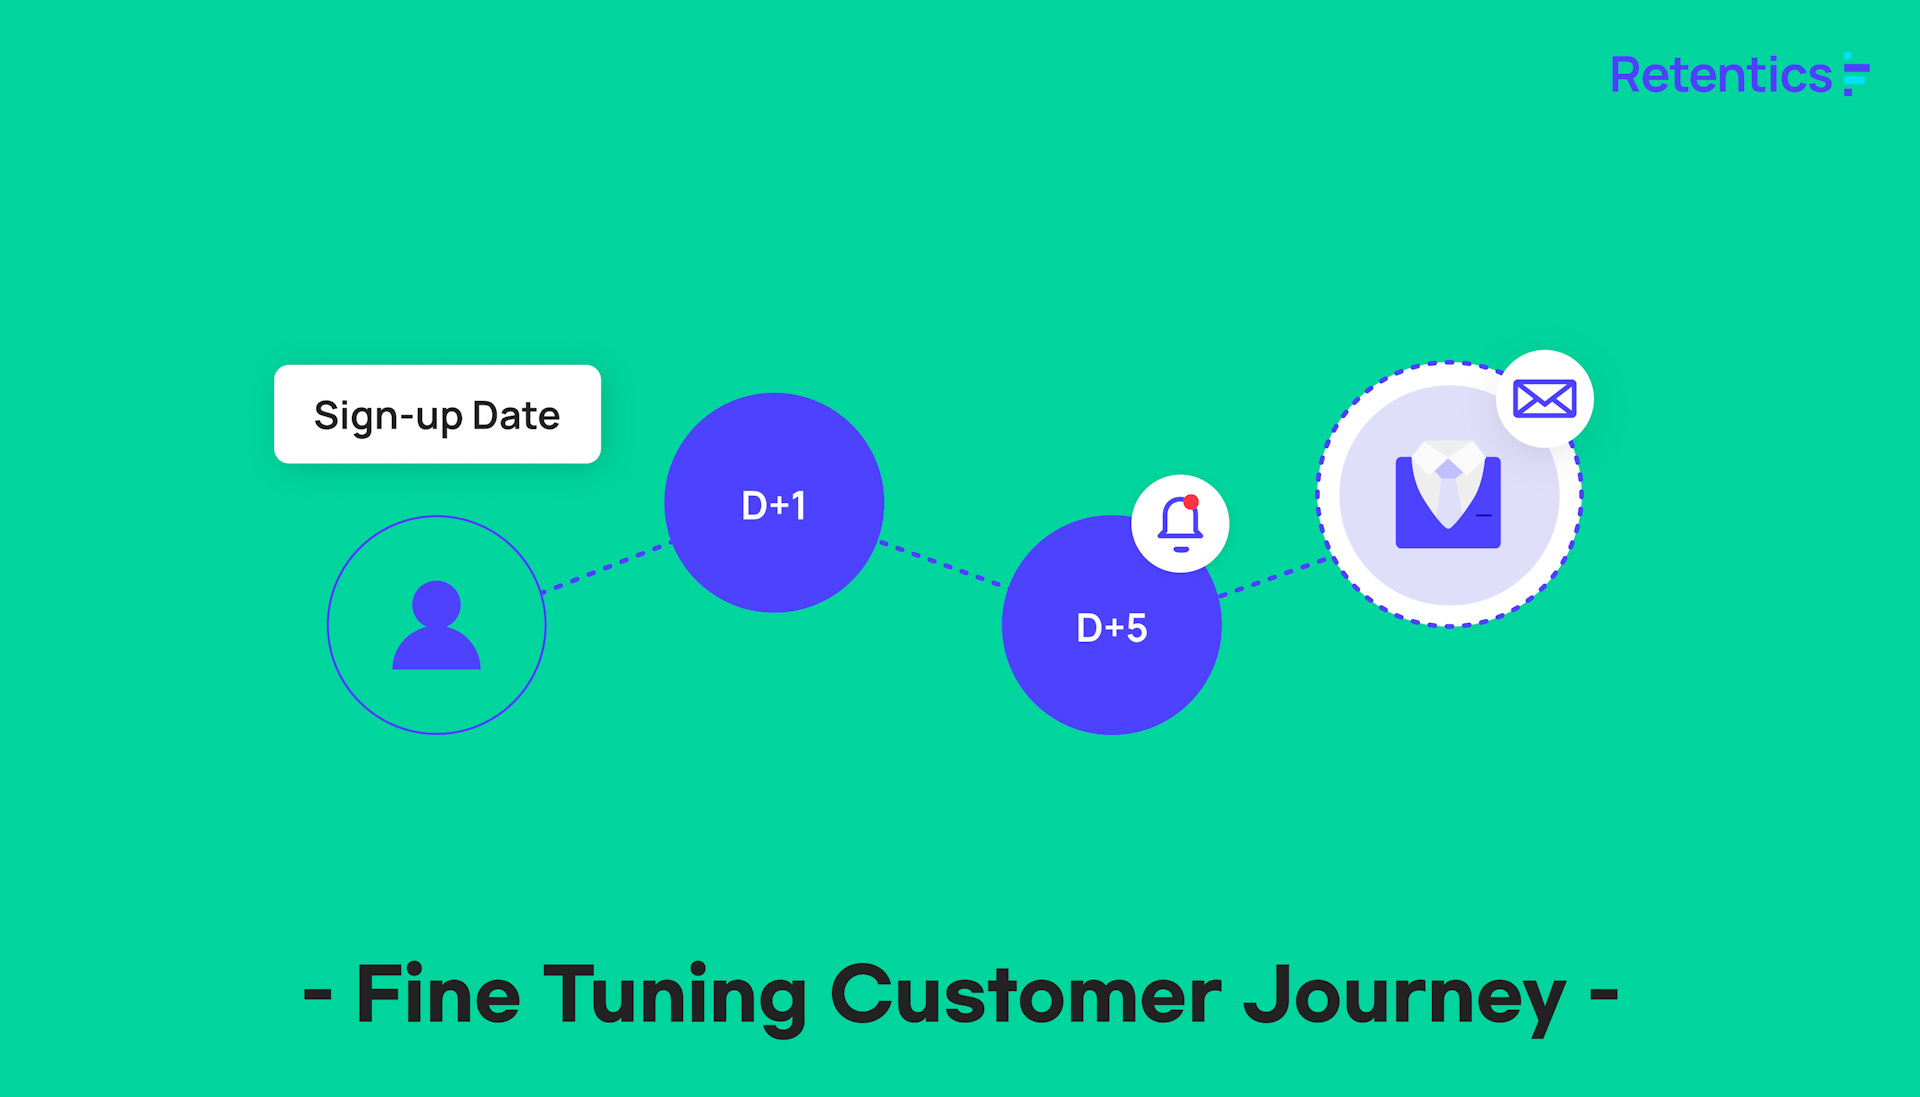 Optimizing the Customer Experience: A Journey Approach